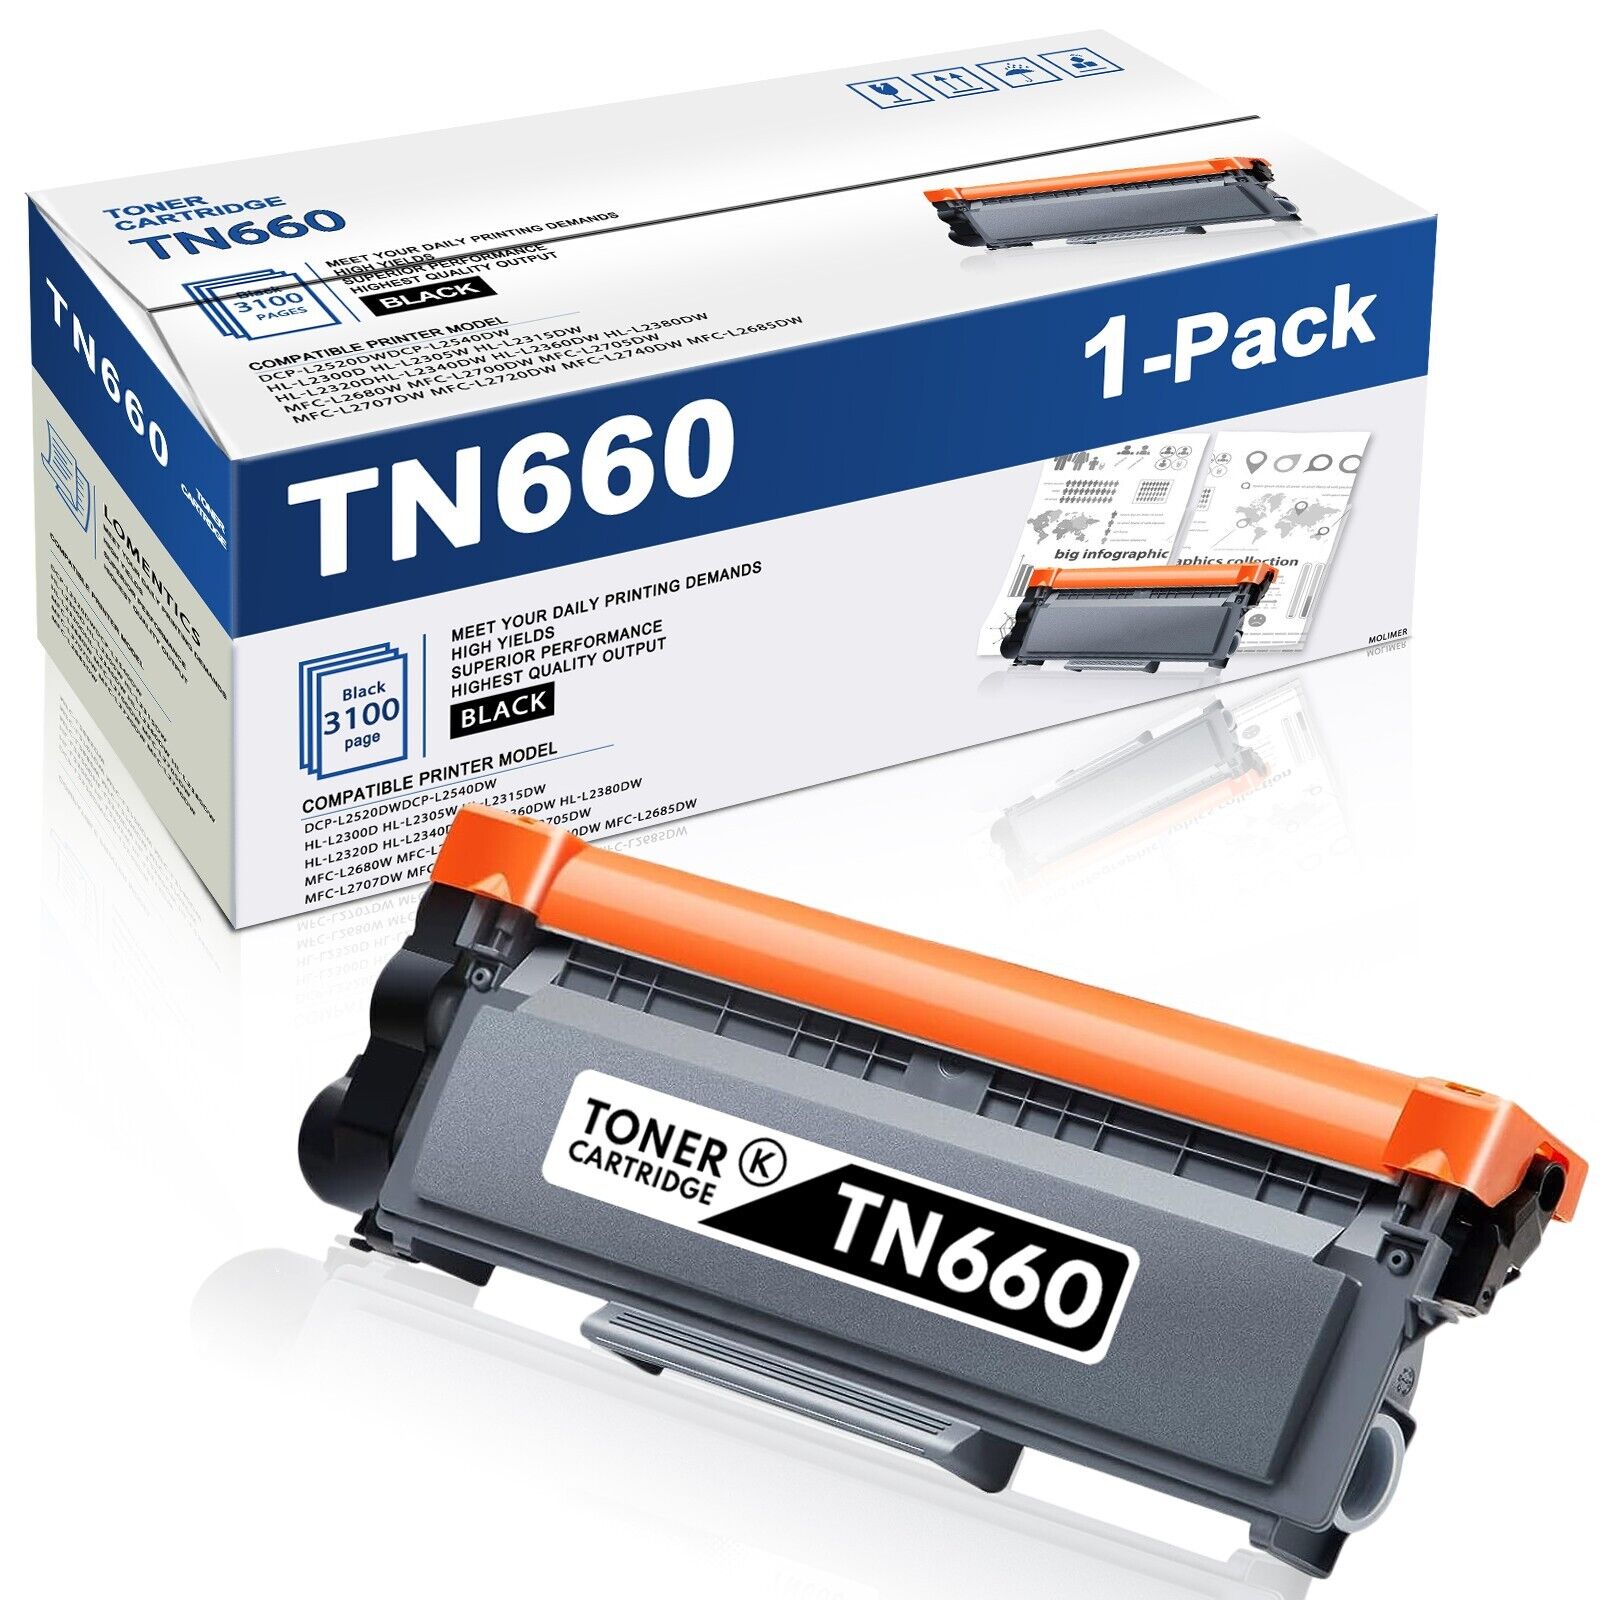 TN660 BK High Yield Toner Cartridge Replacement for Brother DCP-L2540DW Printer